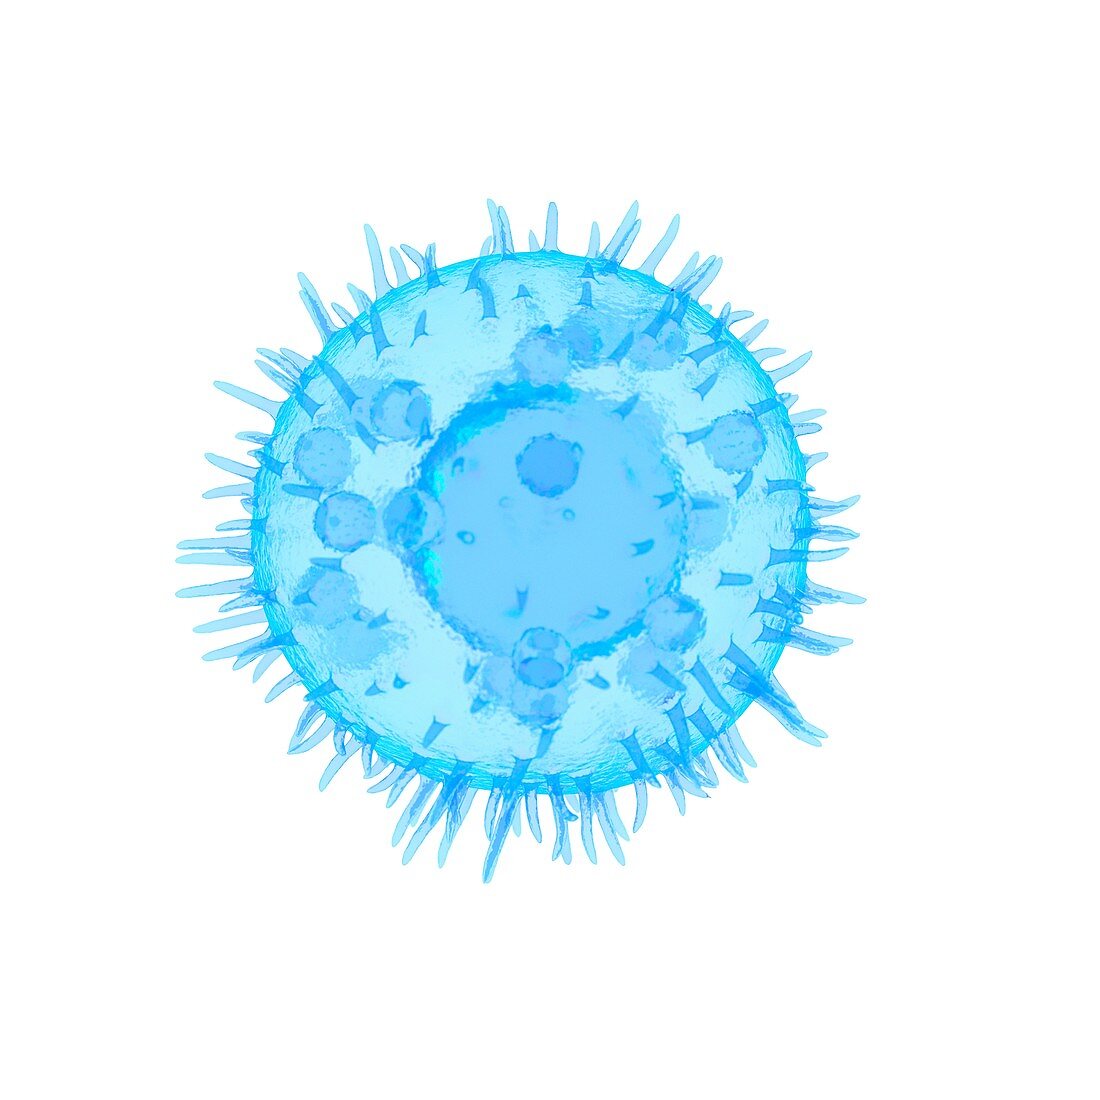 Illustration of a mast cell